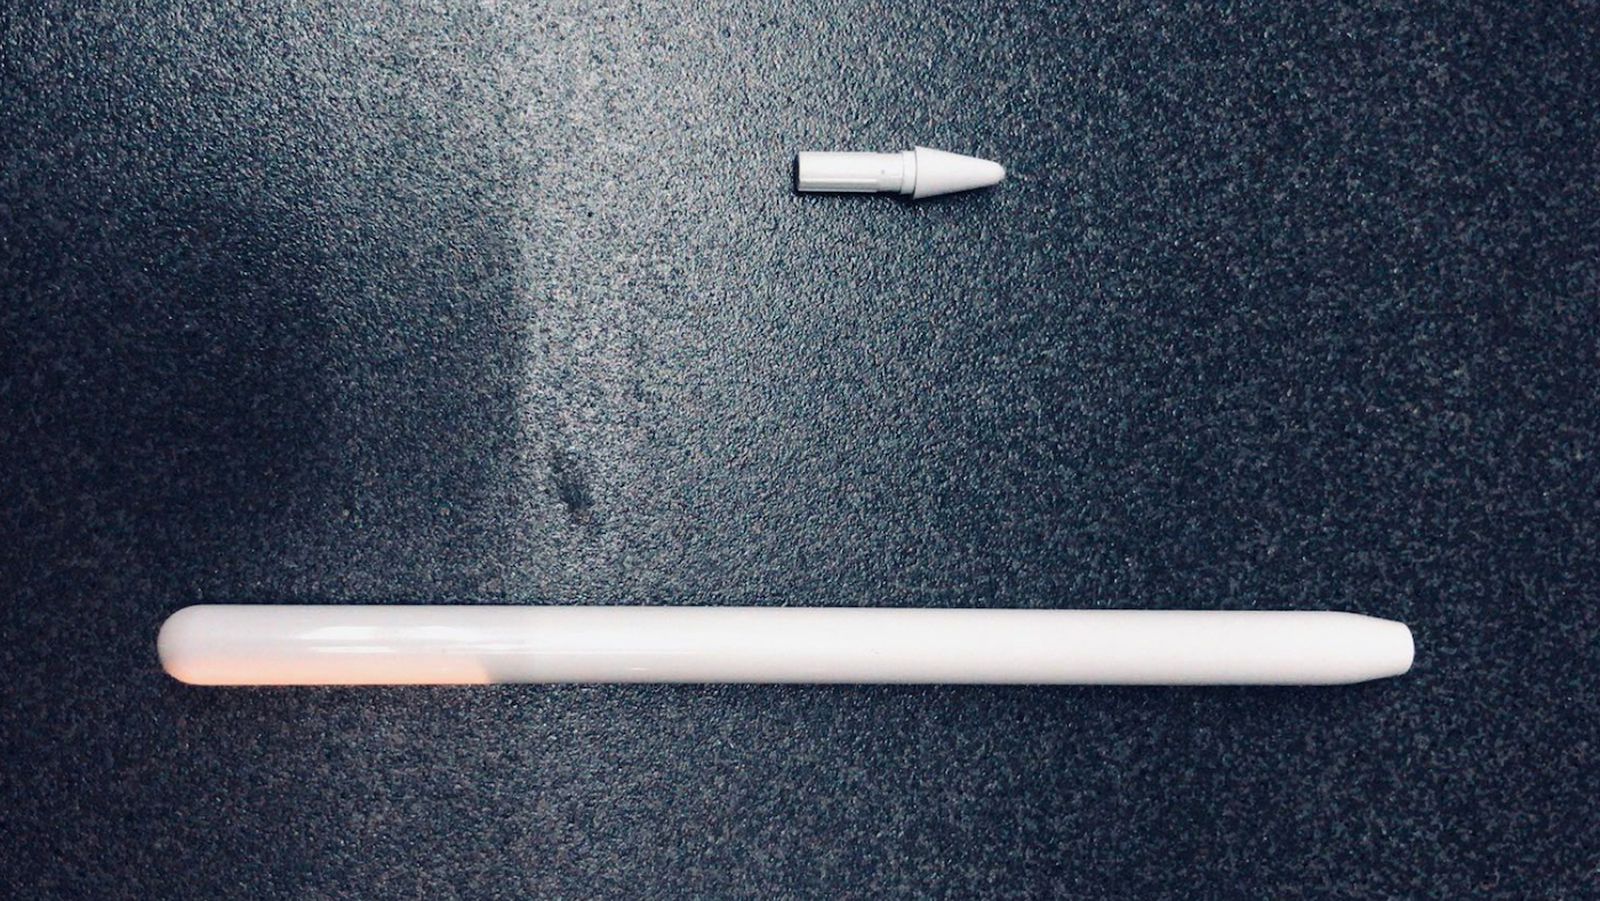 New Apple pencil allegedly leaks with glossy finish and redesigned nib